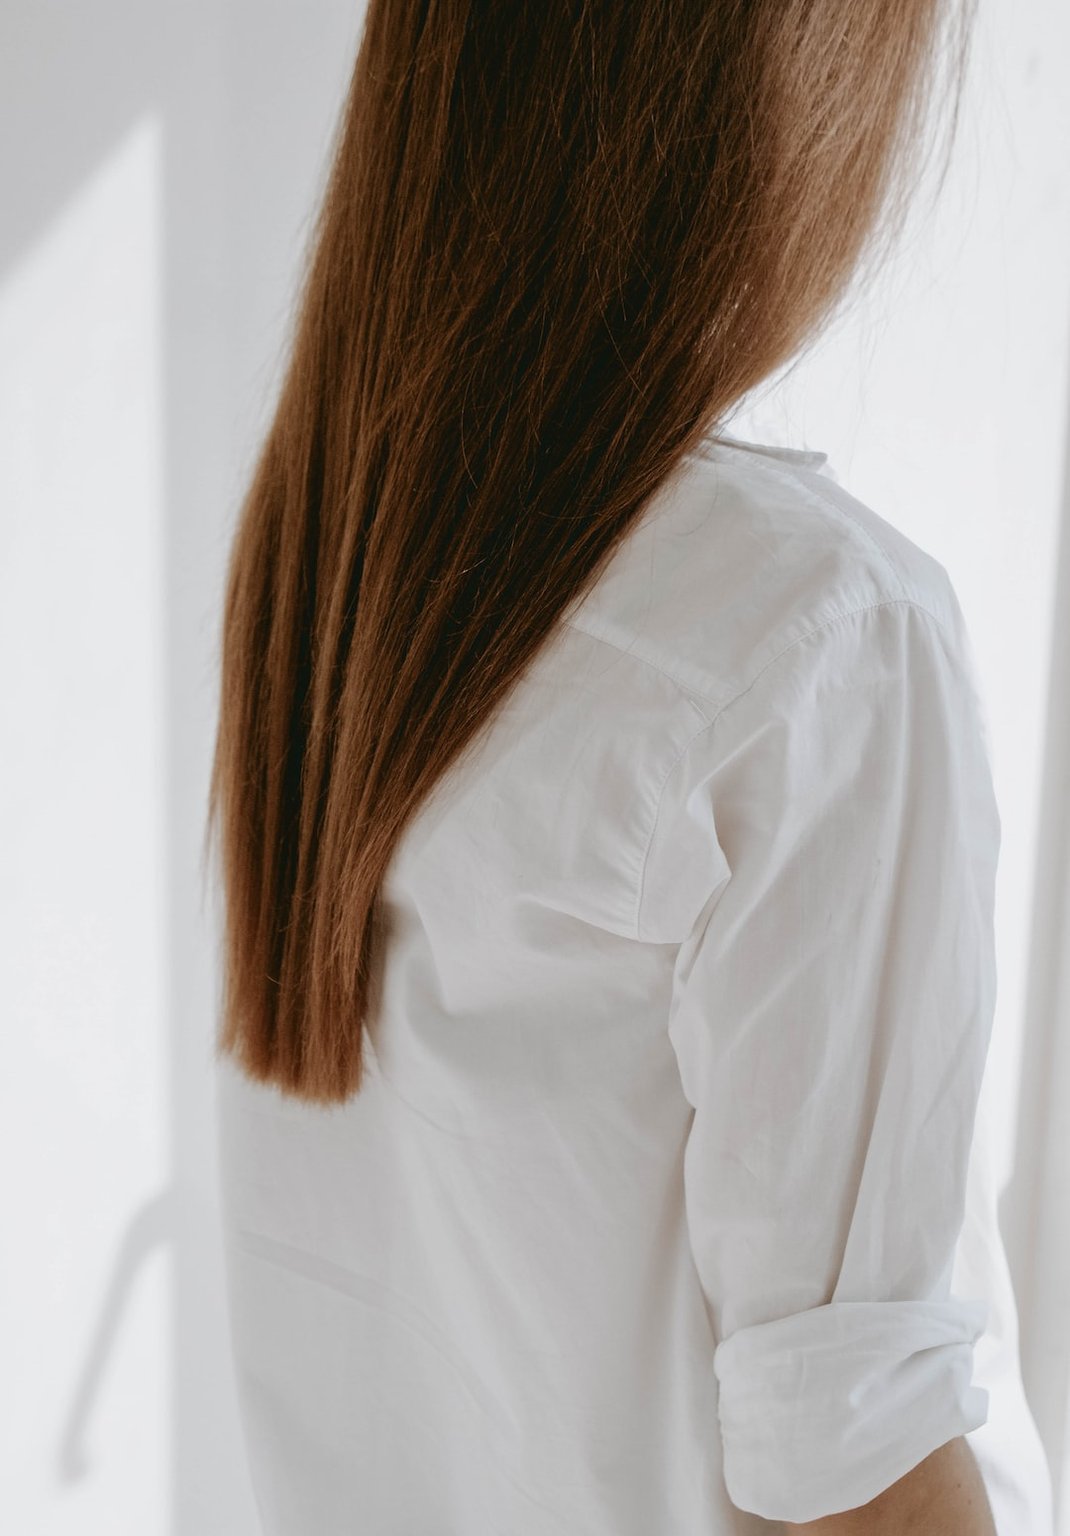 How to Strengthen Hair: An Ultimate Guide